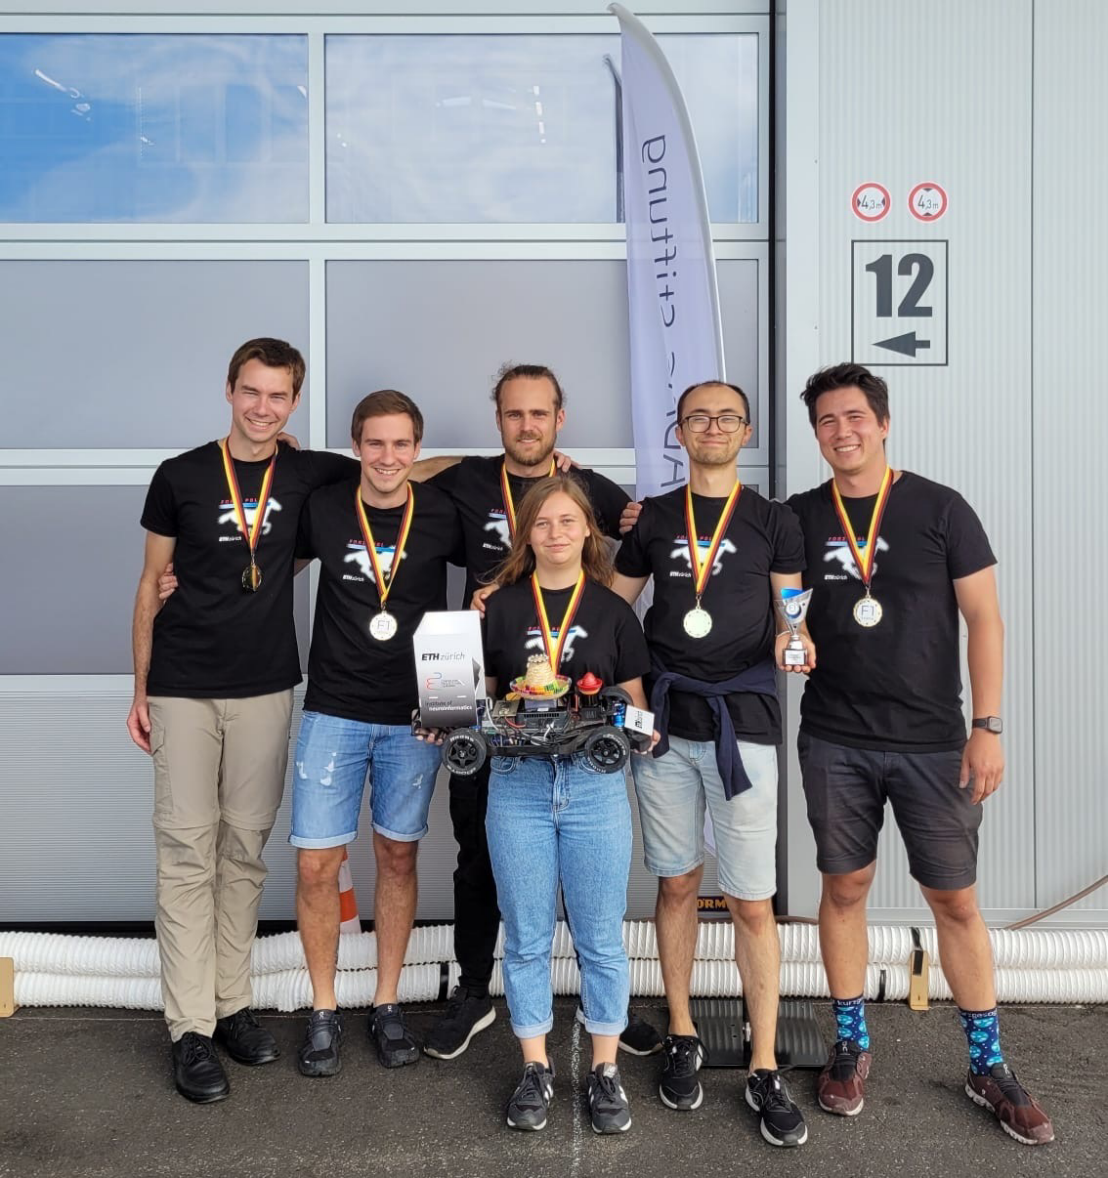 Winning team with gold medals and racing car